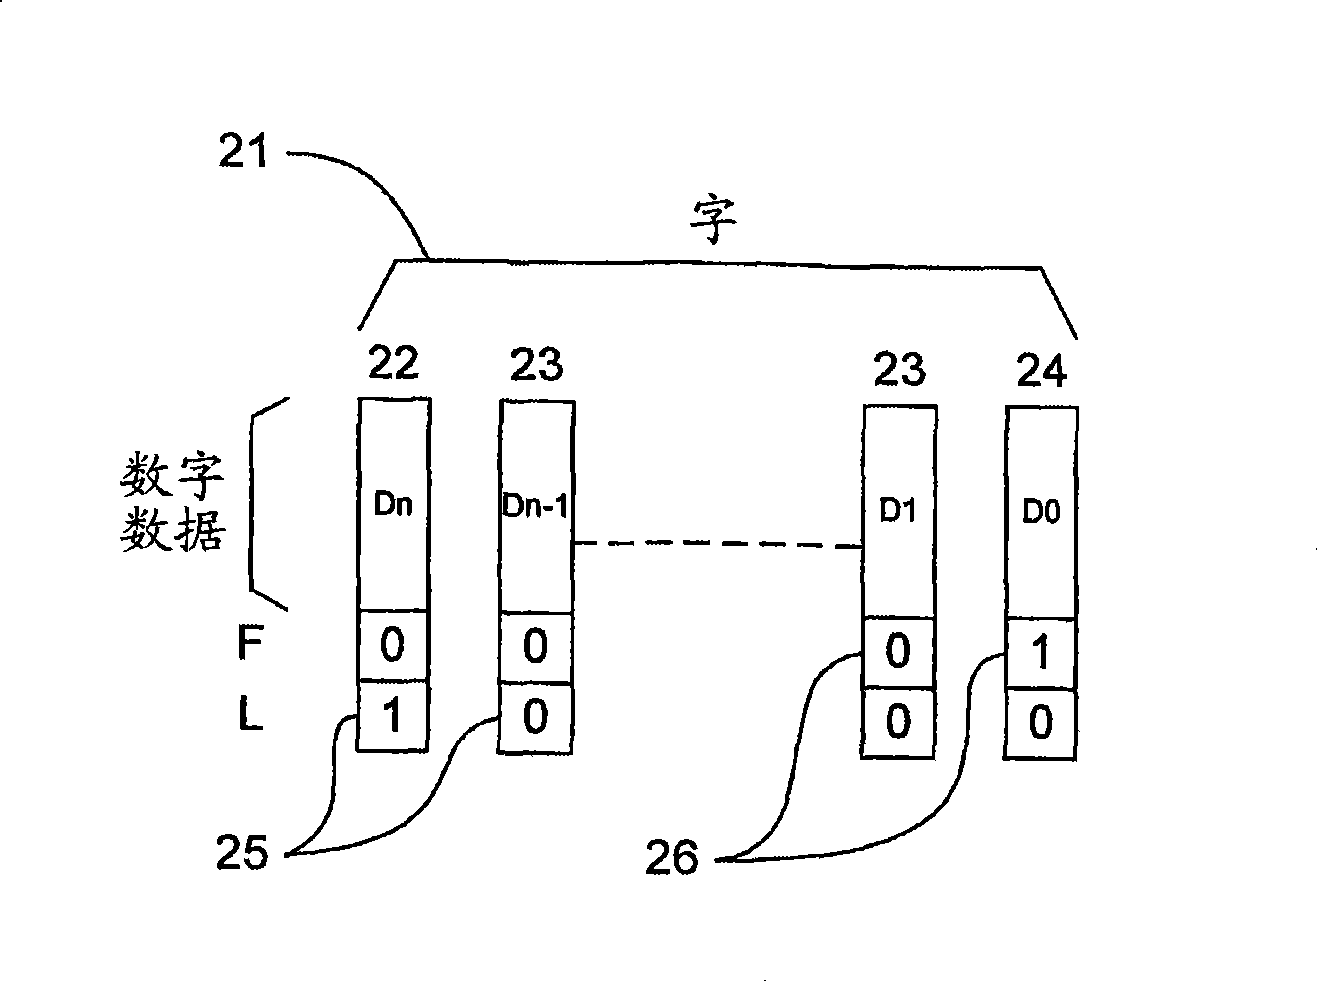 Array of data processing elements with variable precision interconnect